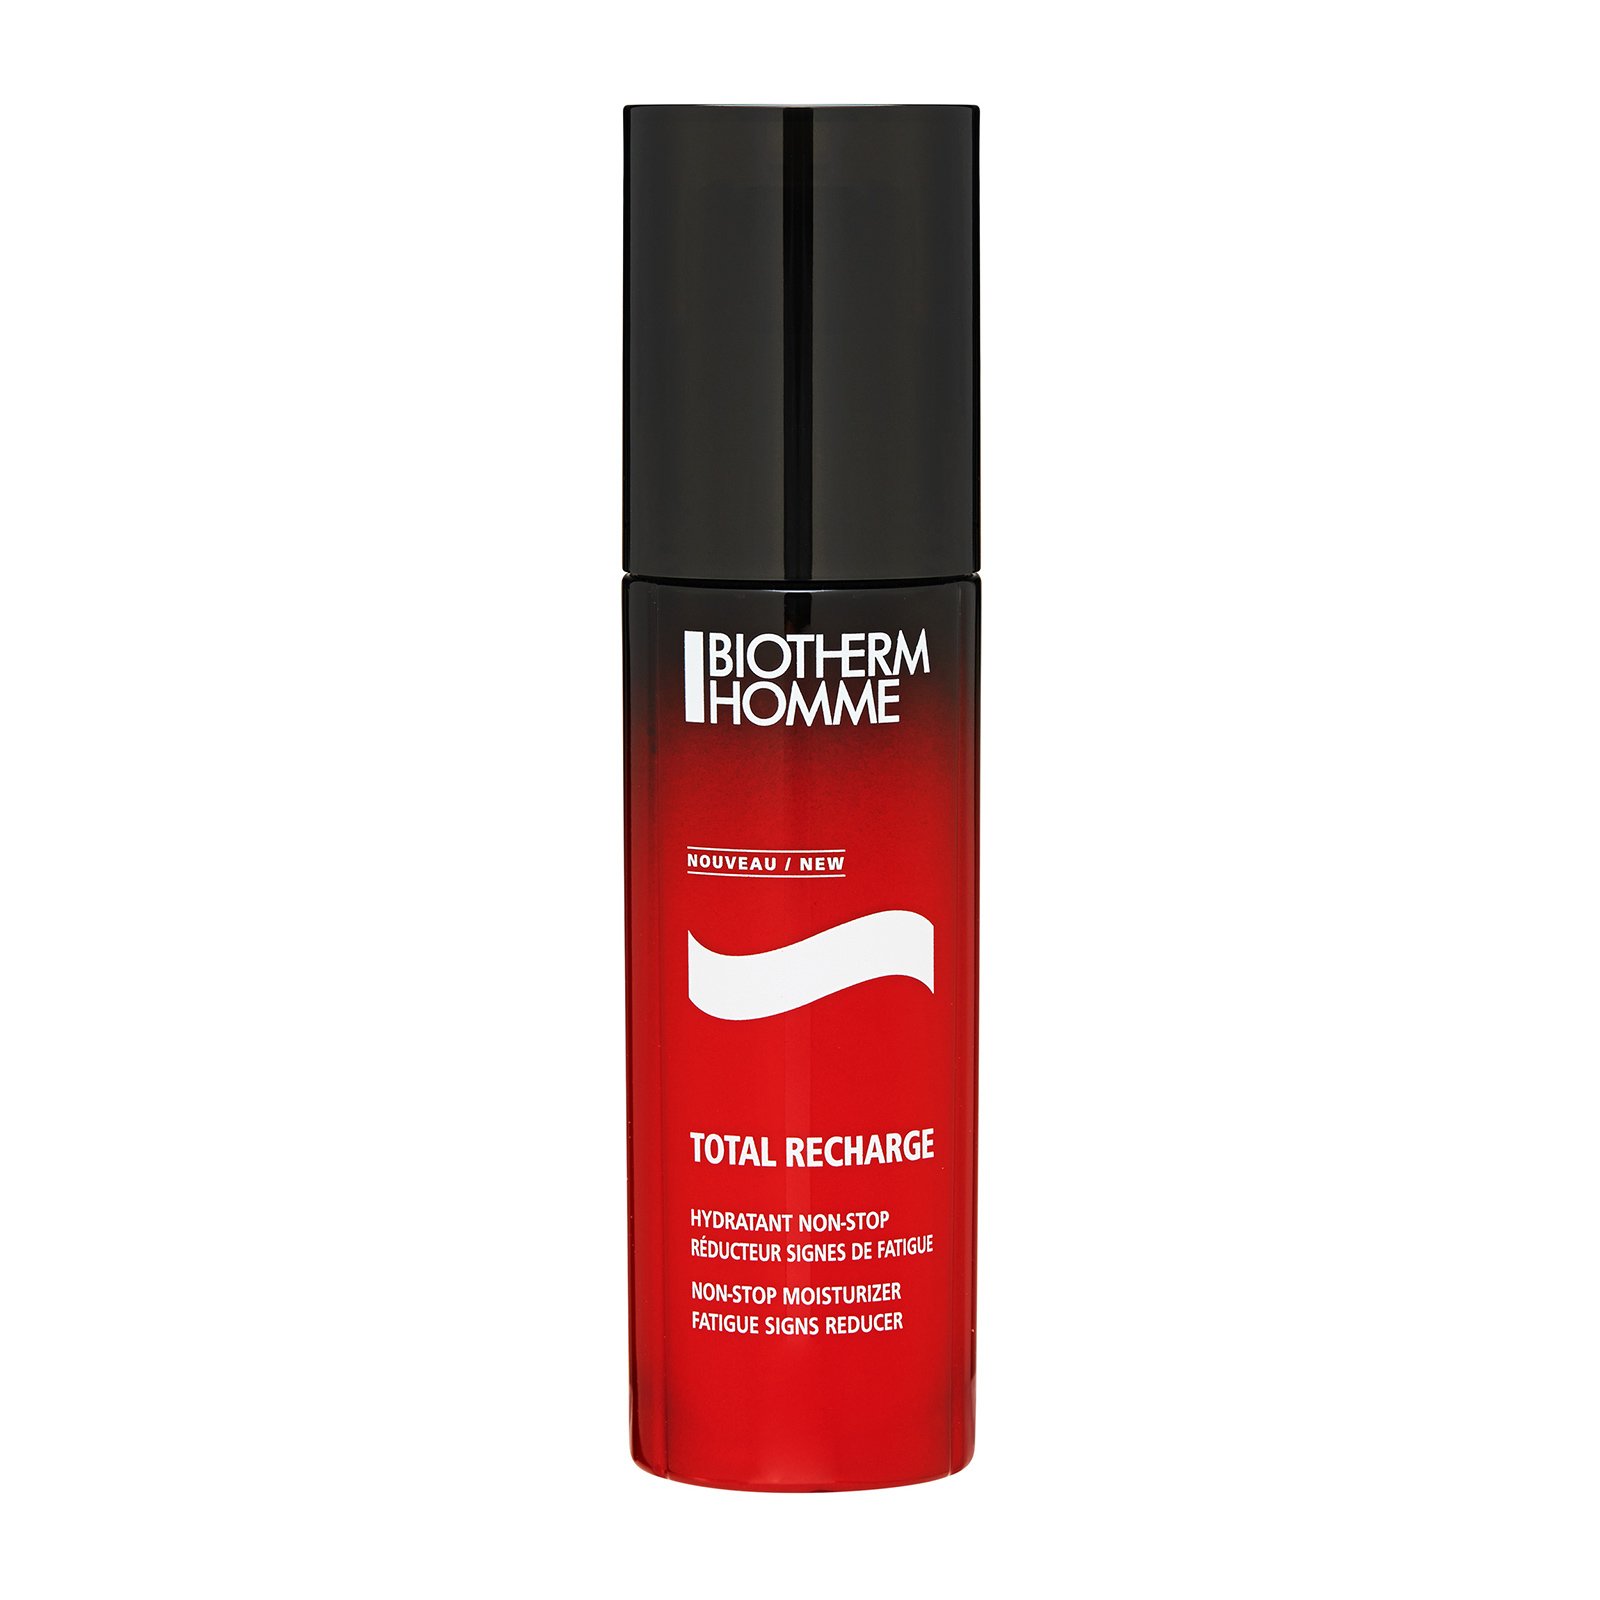 Homme Total Recharge Non-Stop Moisturizer Fatigue Signs Reducer